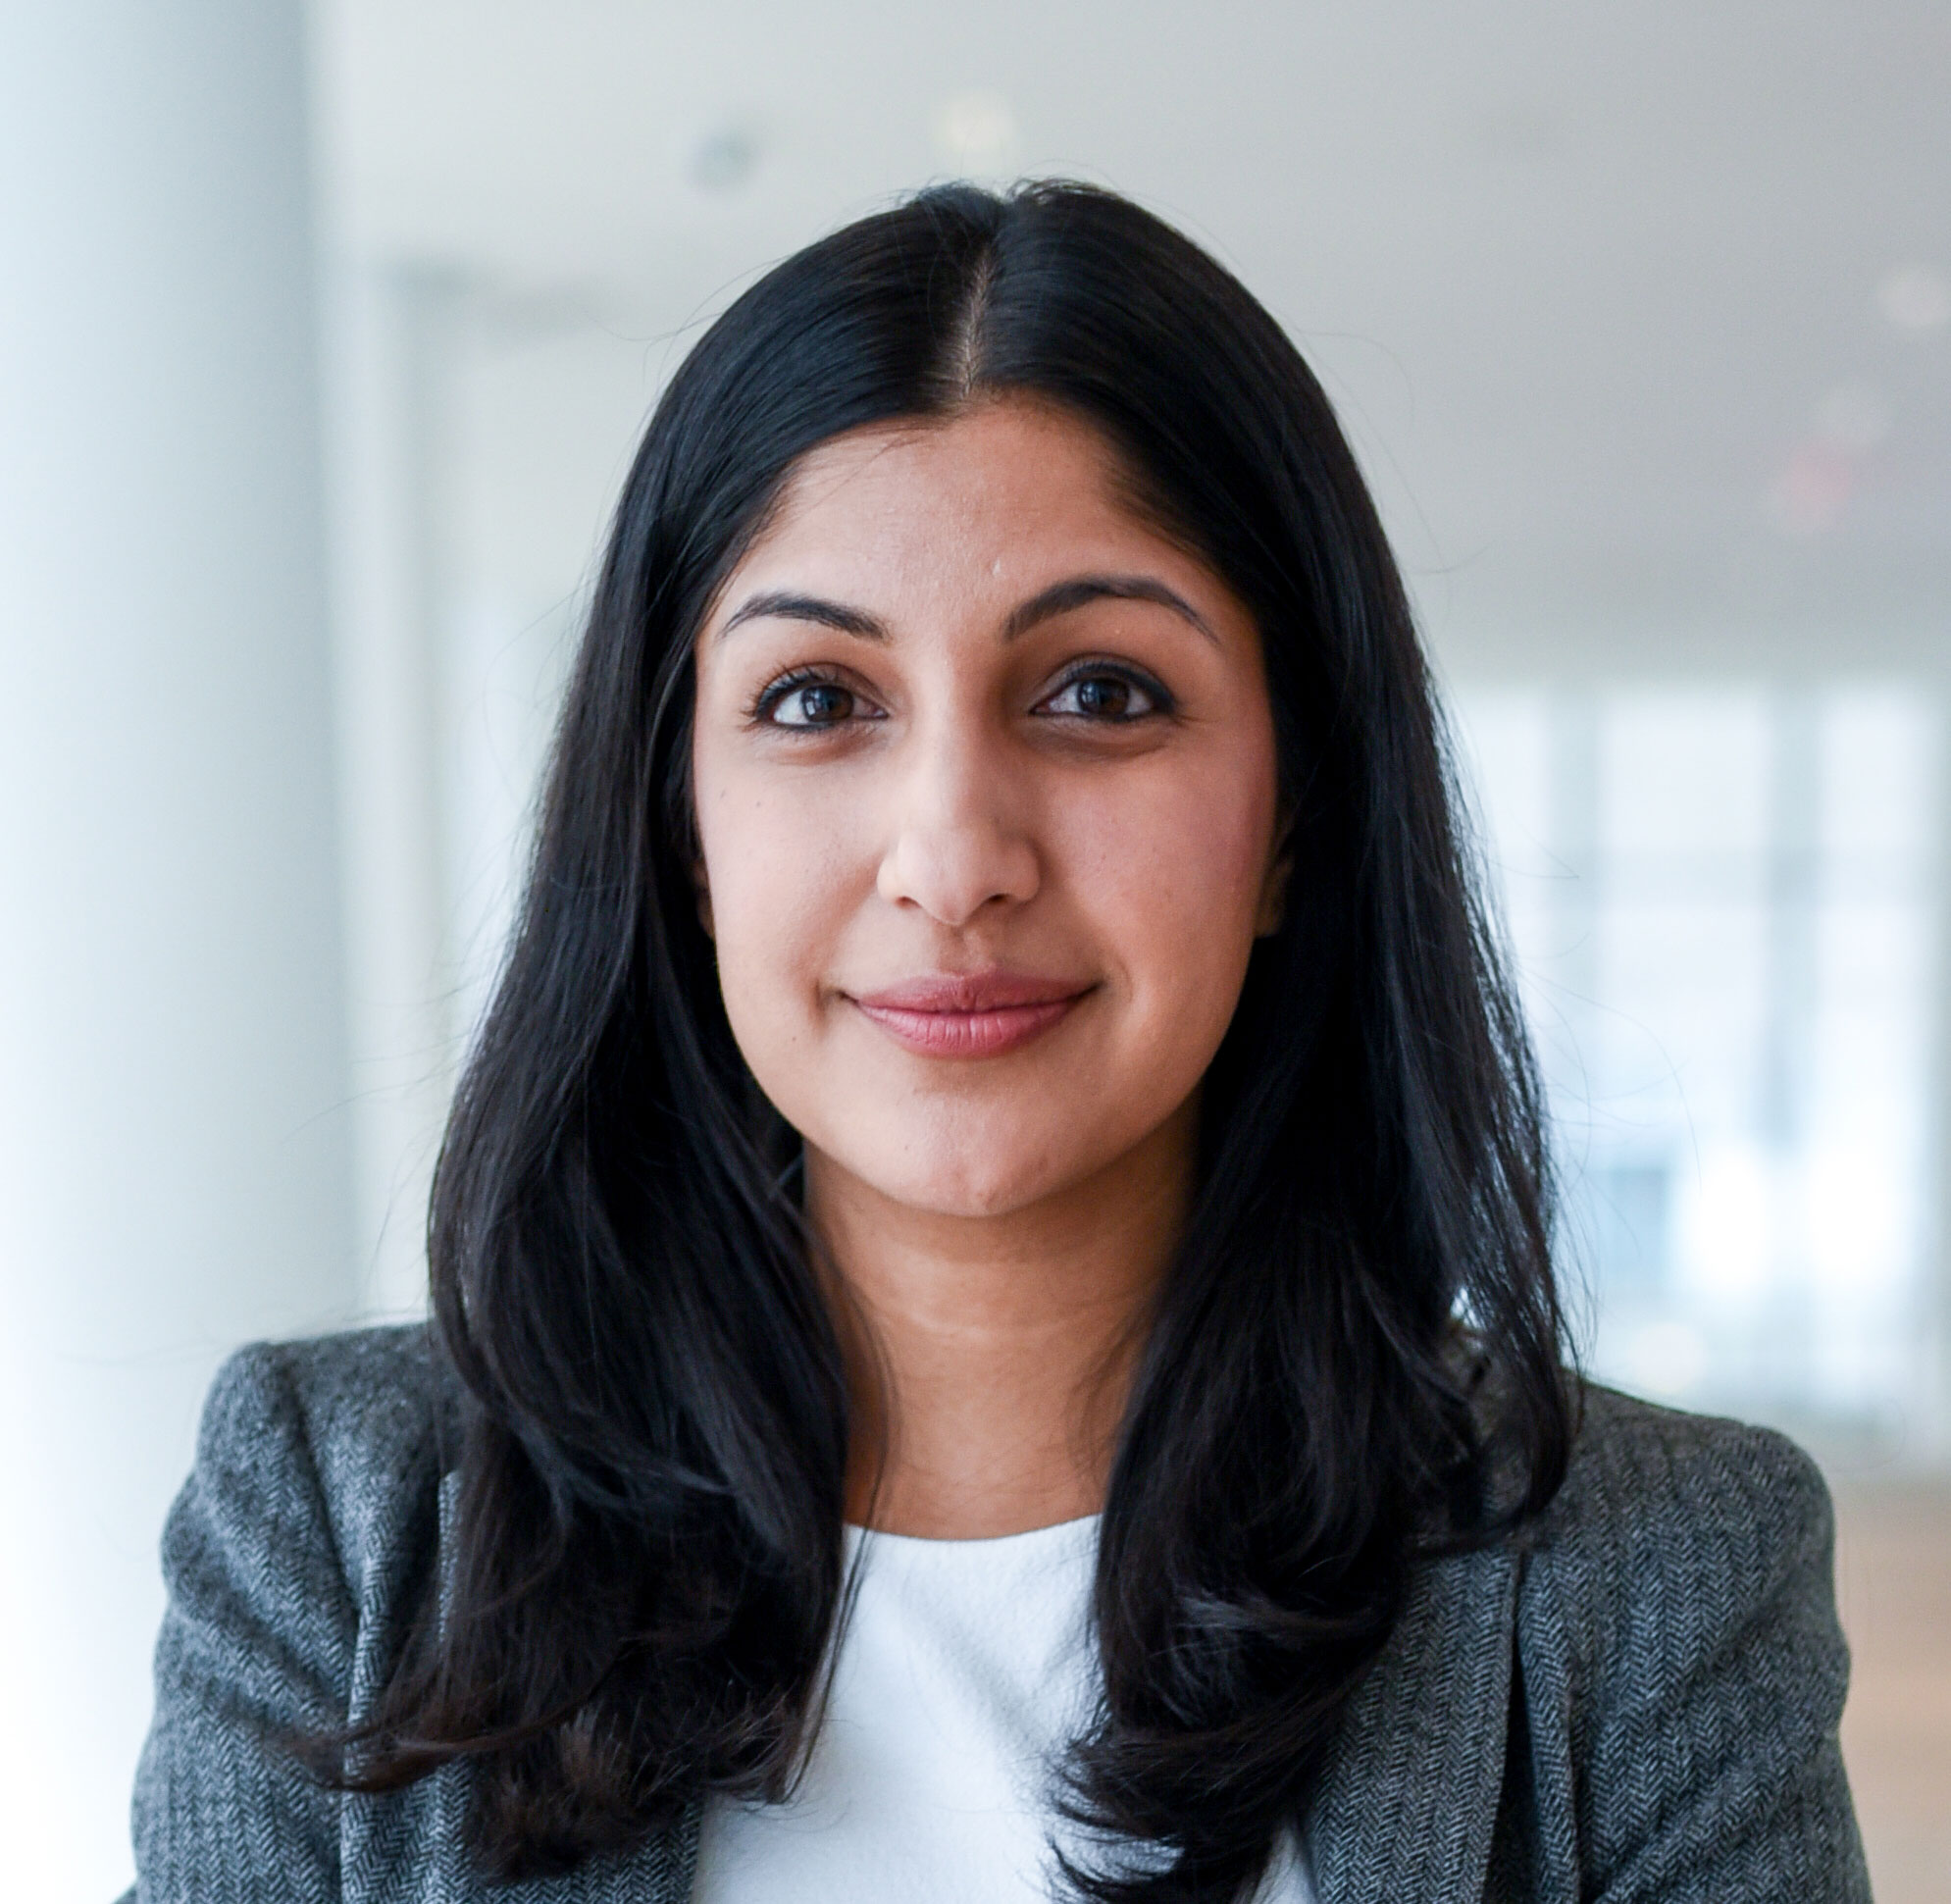 Dolby Appoints Anjali Sud to its Board of Directors